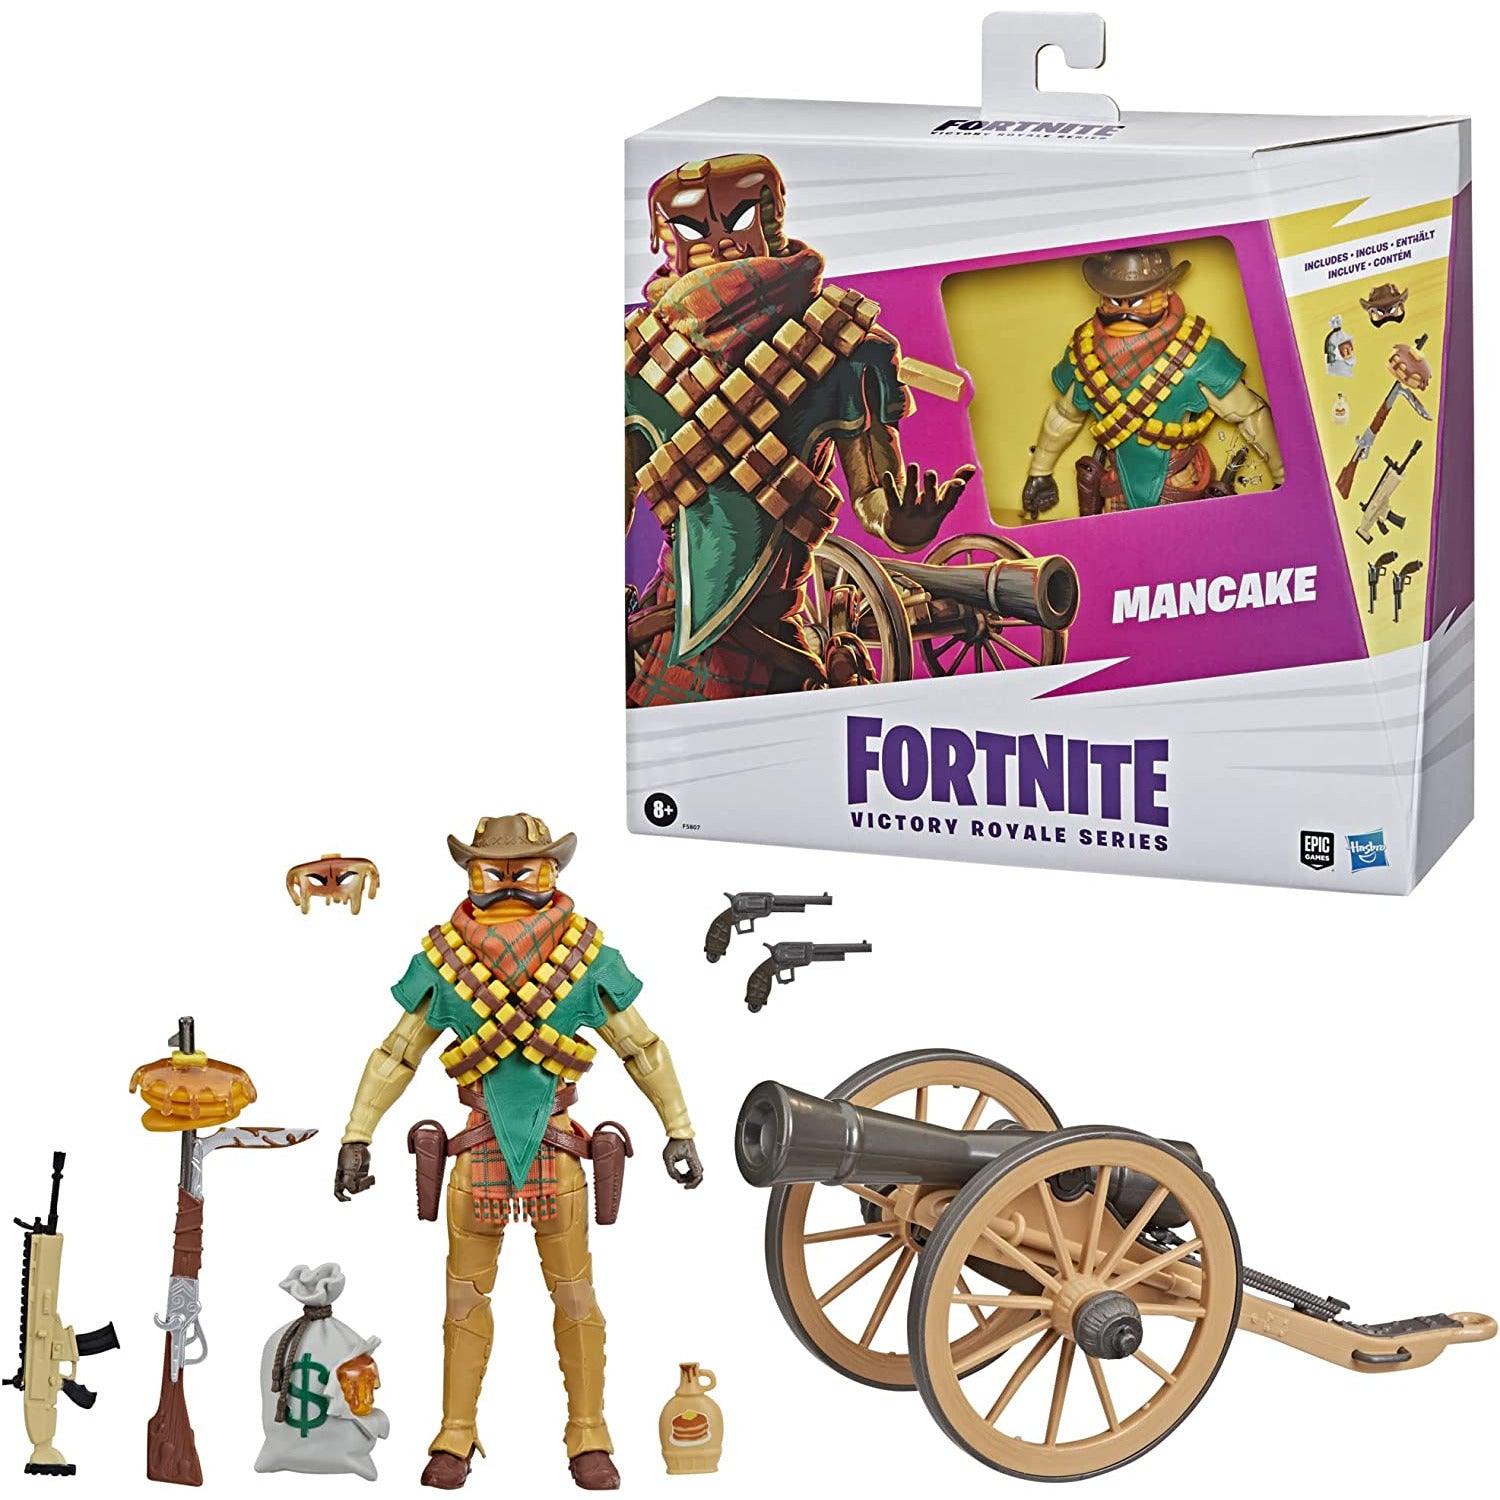 FORTNITE Hasbro Victory Royale Series Mancake Deluxe Pack Collectible Action Figure with Accessories - Ages 8 and Up, 6-inch - BumbleToys - 8+ Years, 8-13 Years, Action Battling, Action Figures, Boys, Figures, Fortnite, OXE, Pre-Order